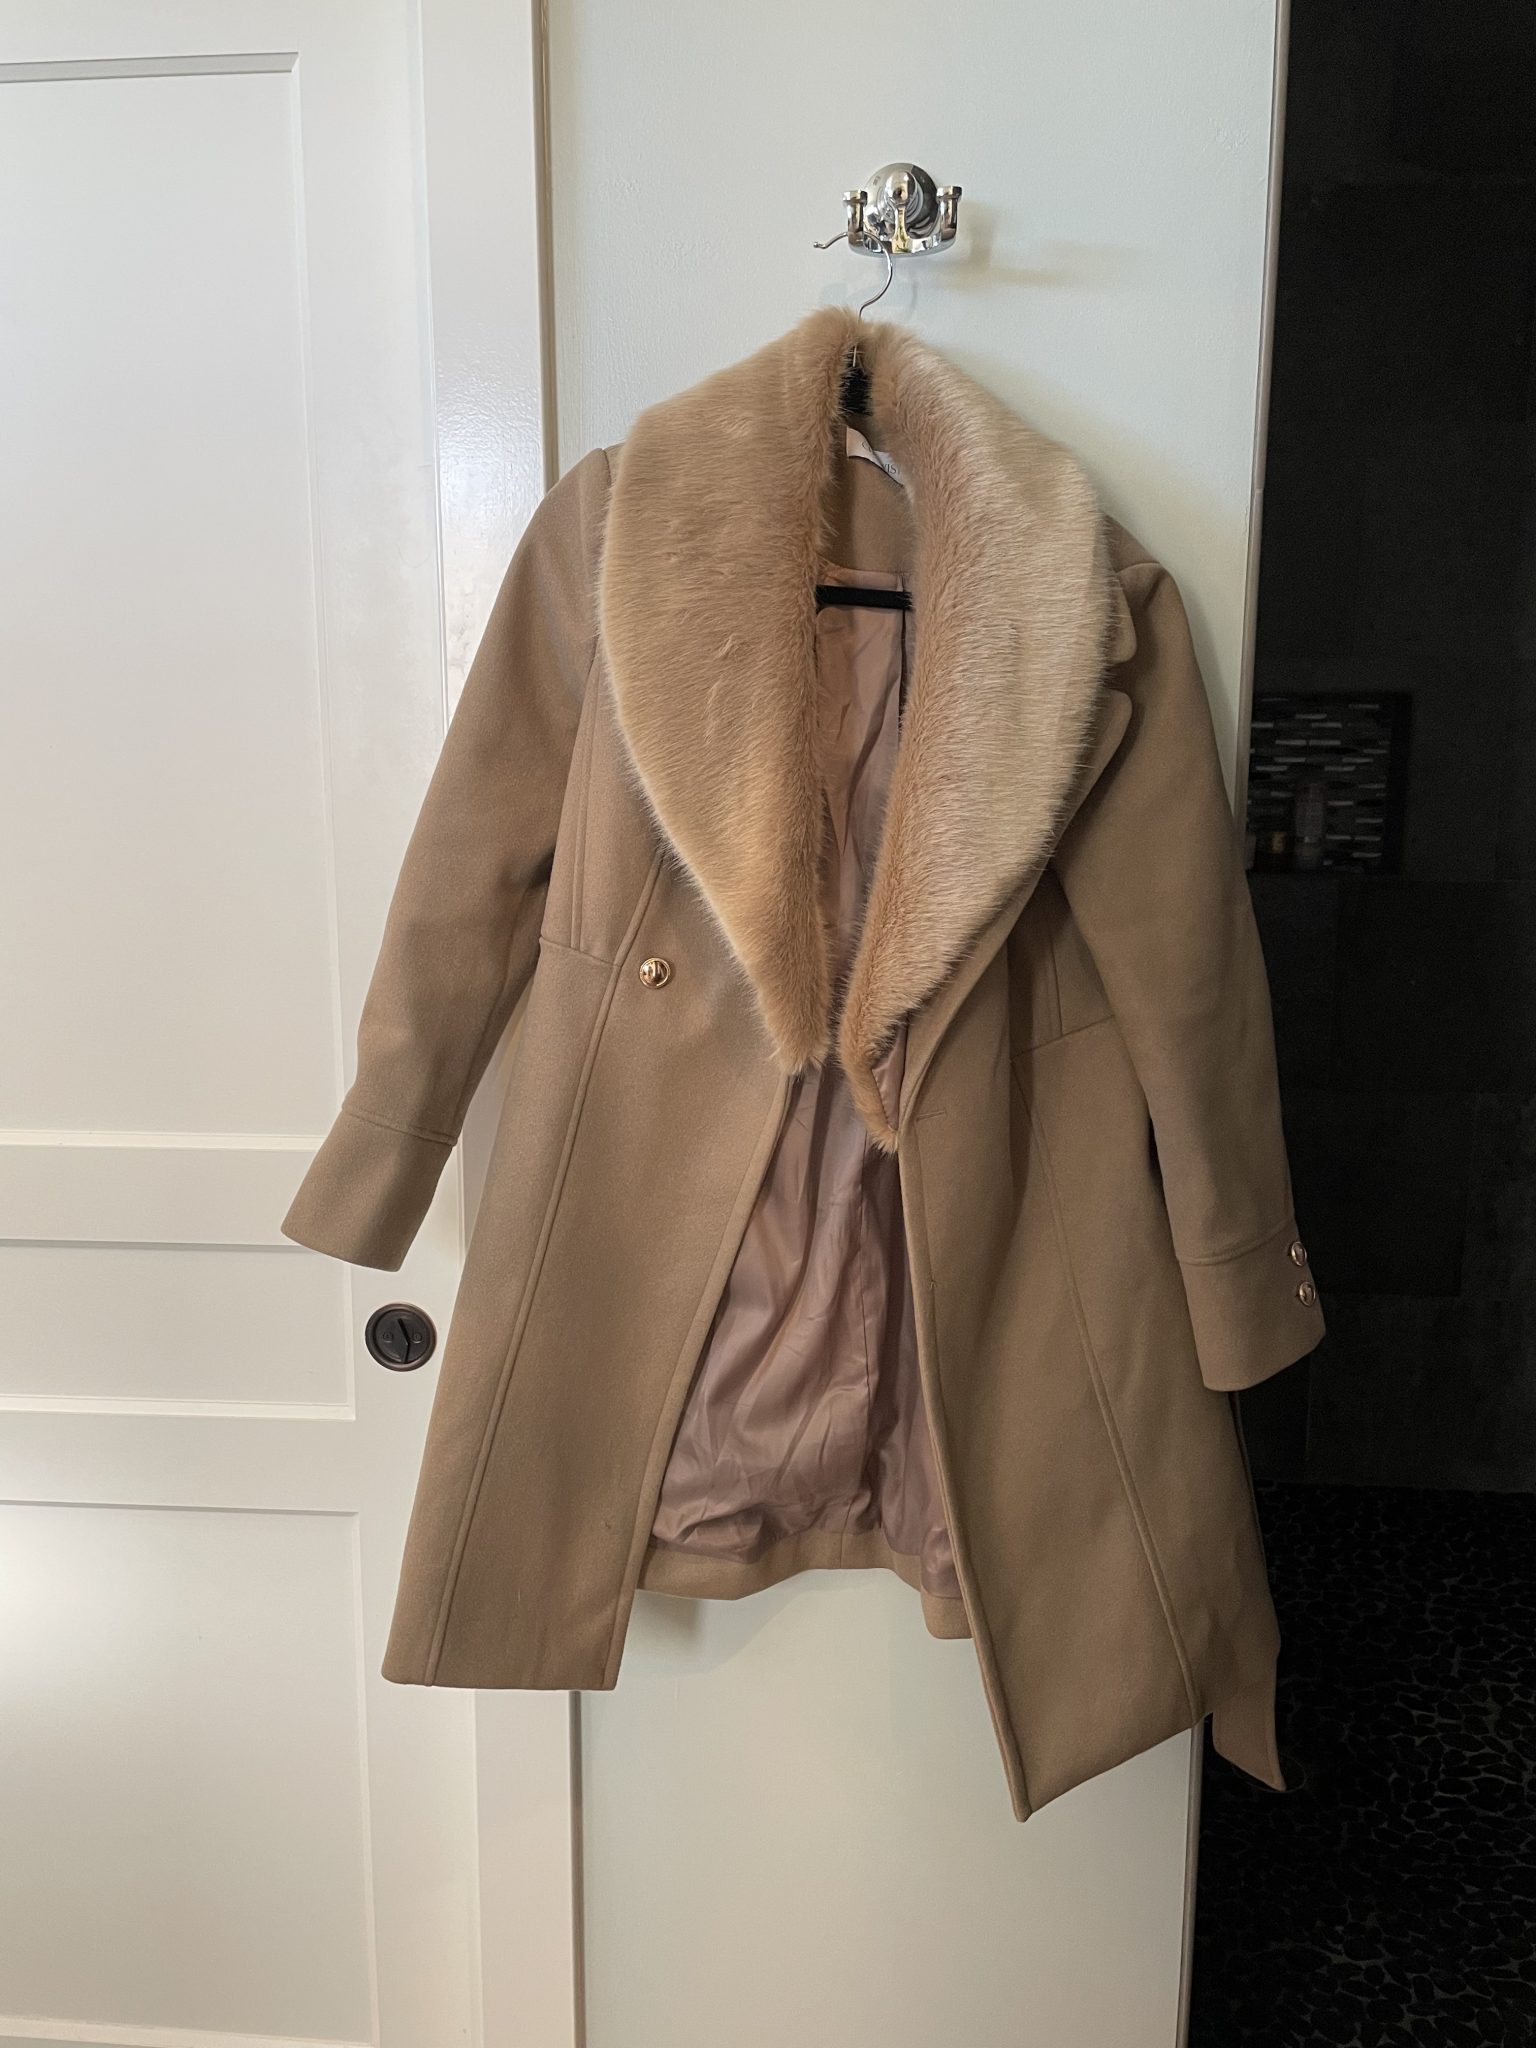 Chicwish coat review